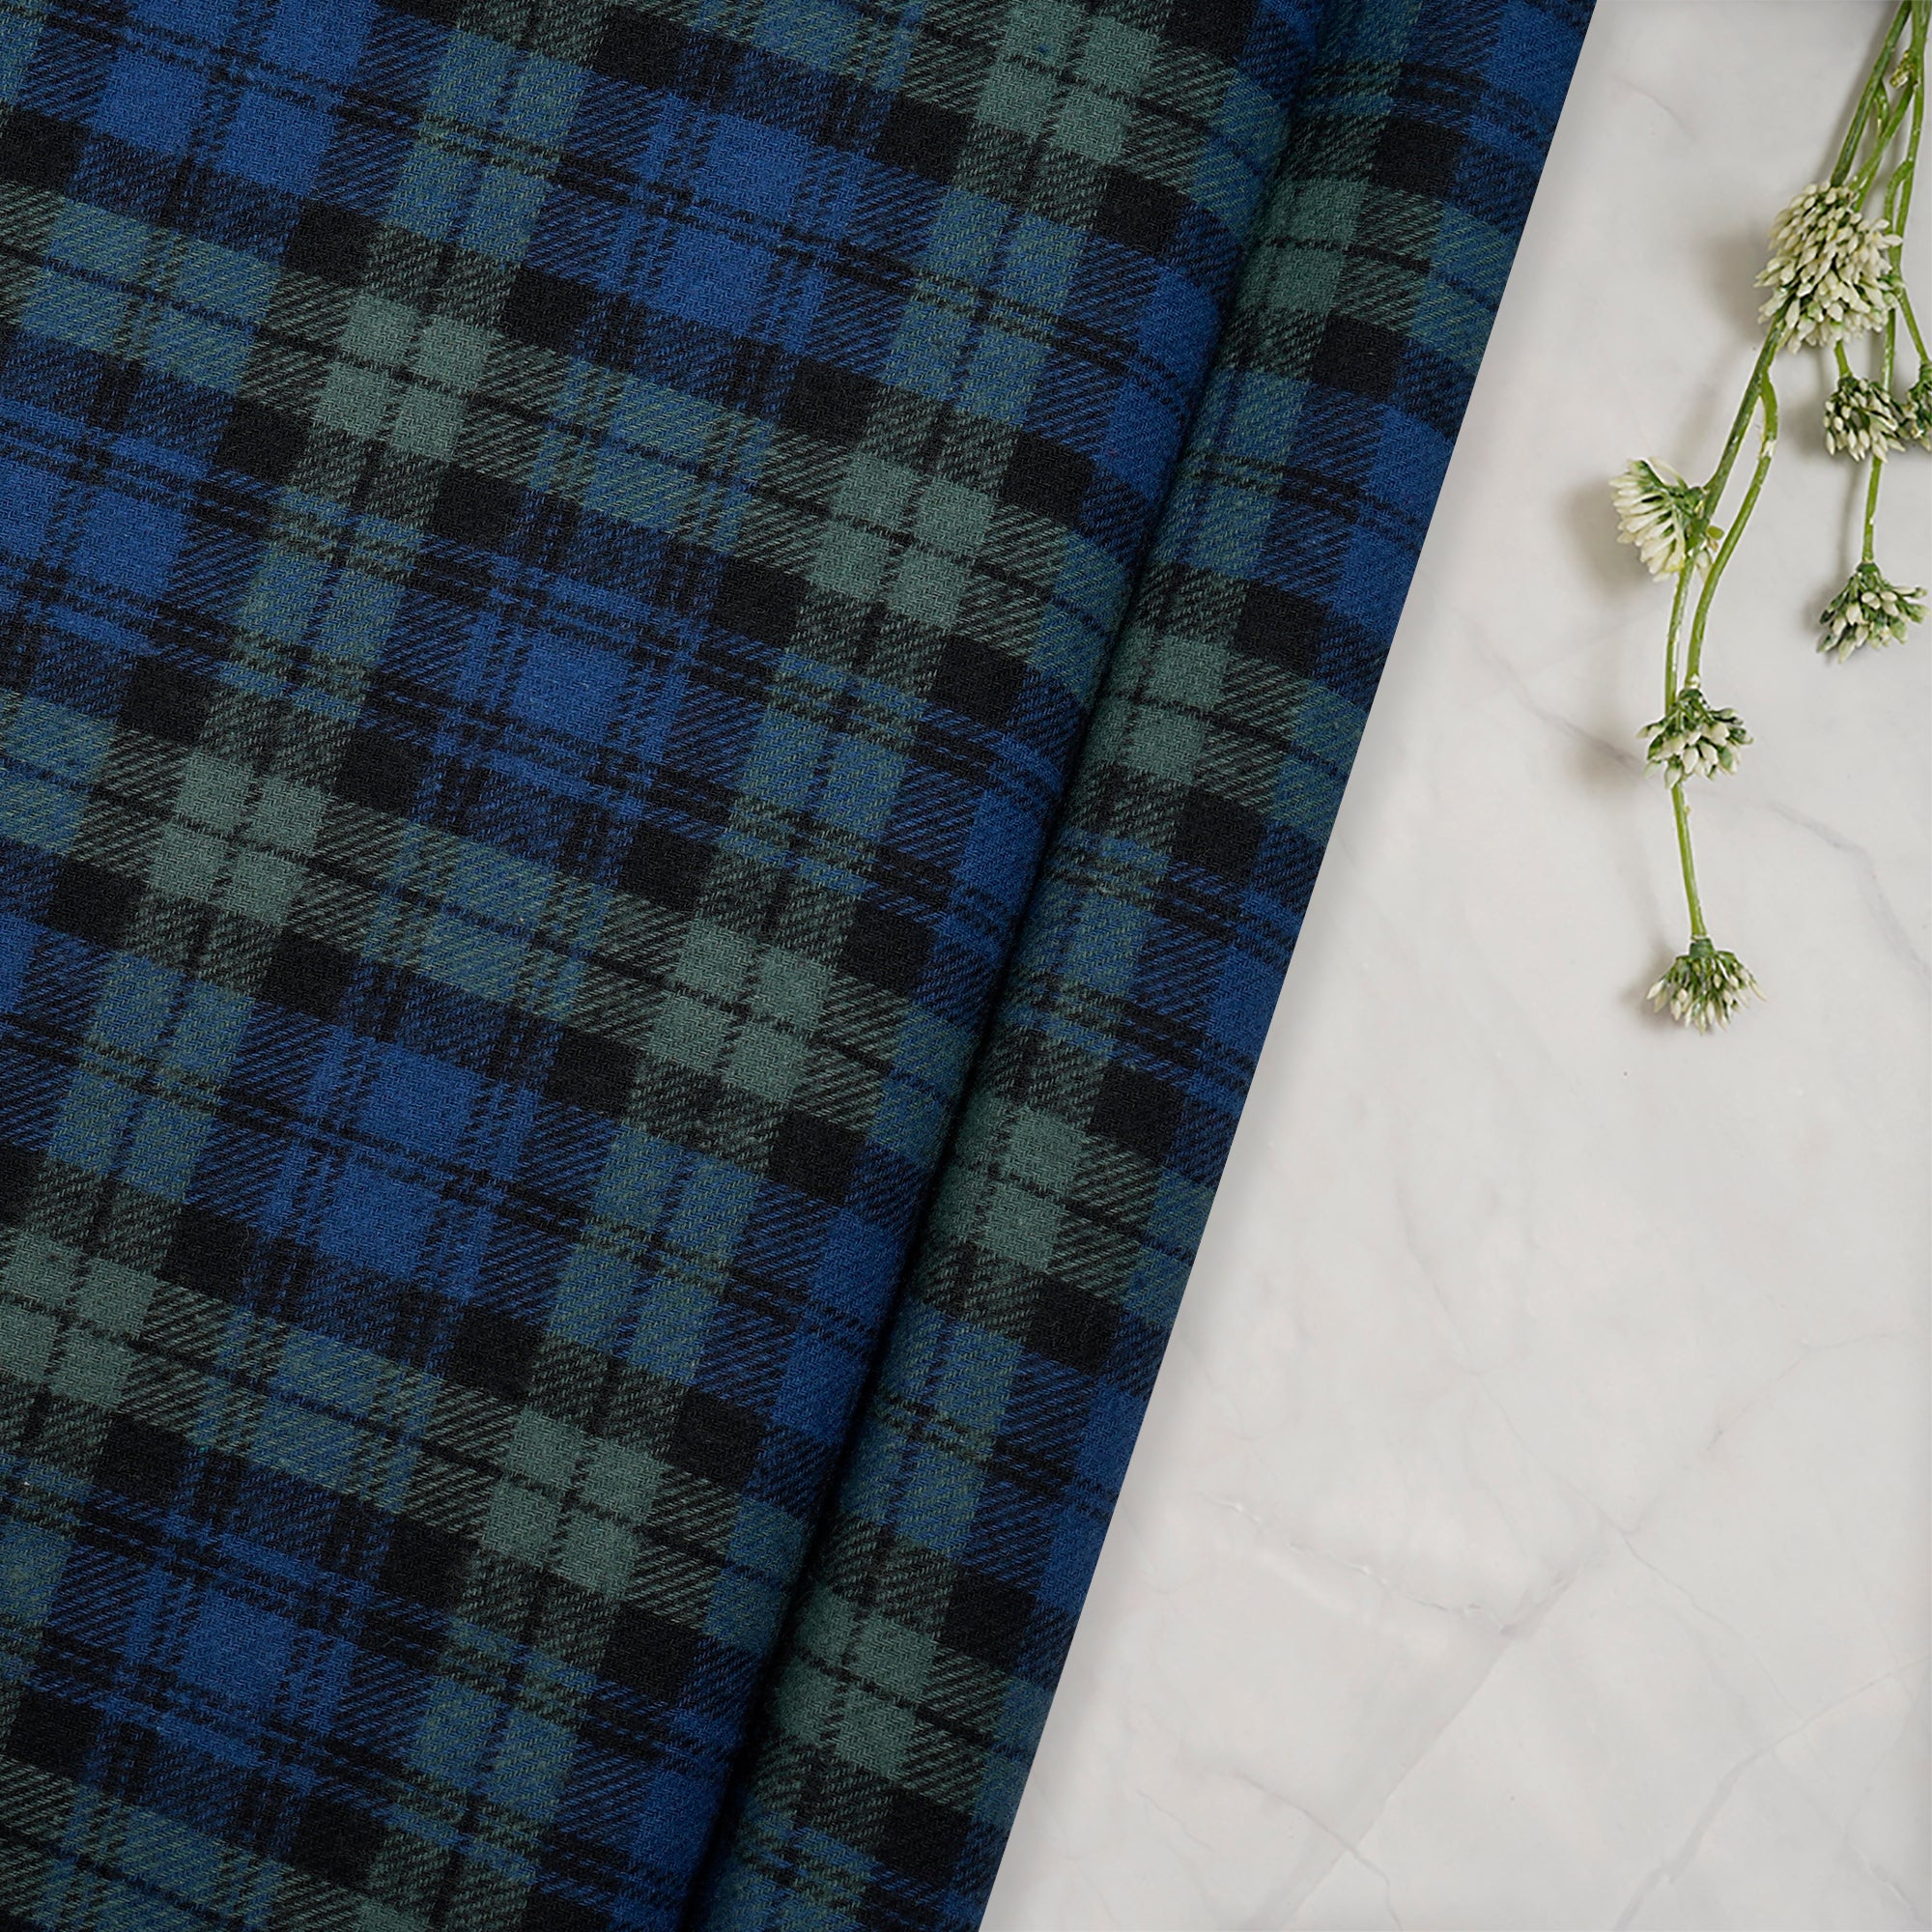 Blue-Green Yarn Dyed Flannel Cotton Check Fabric